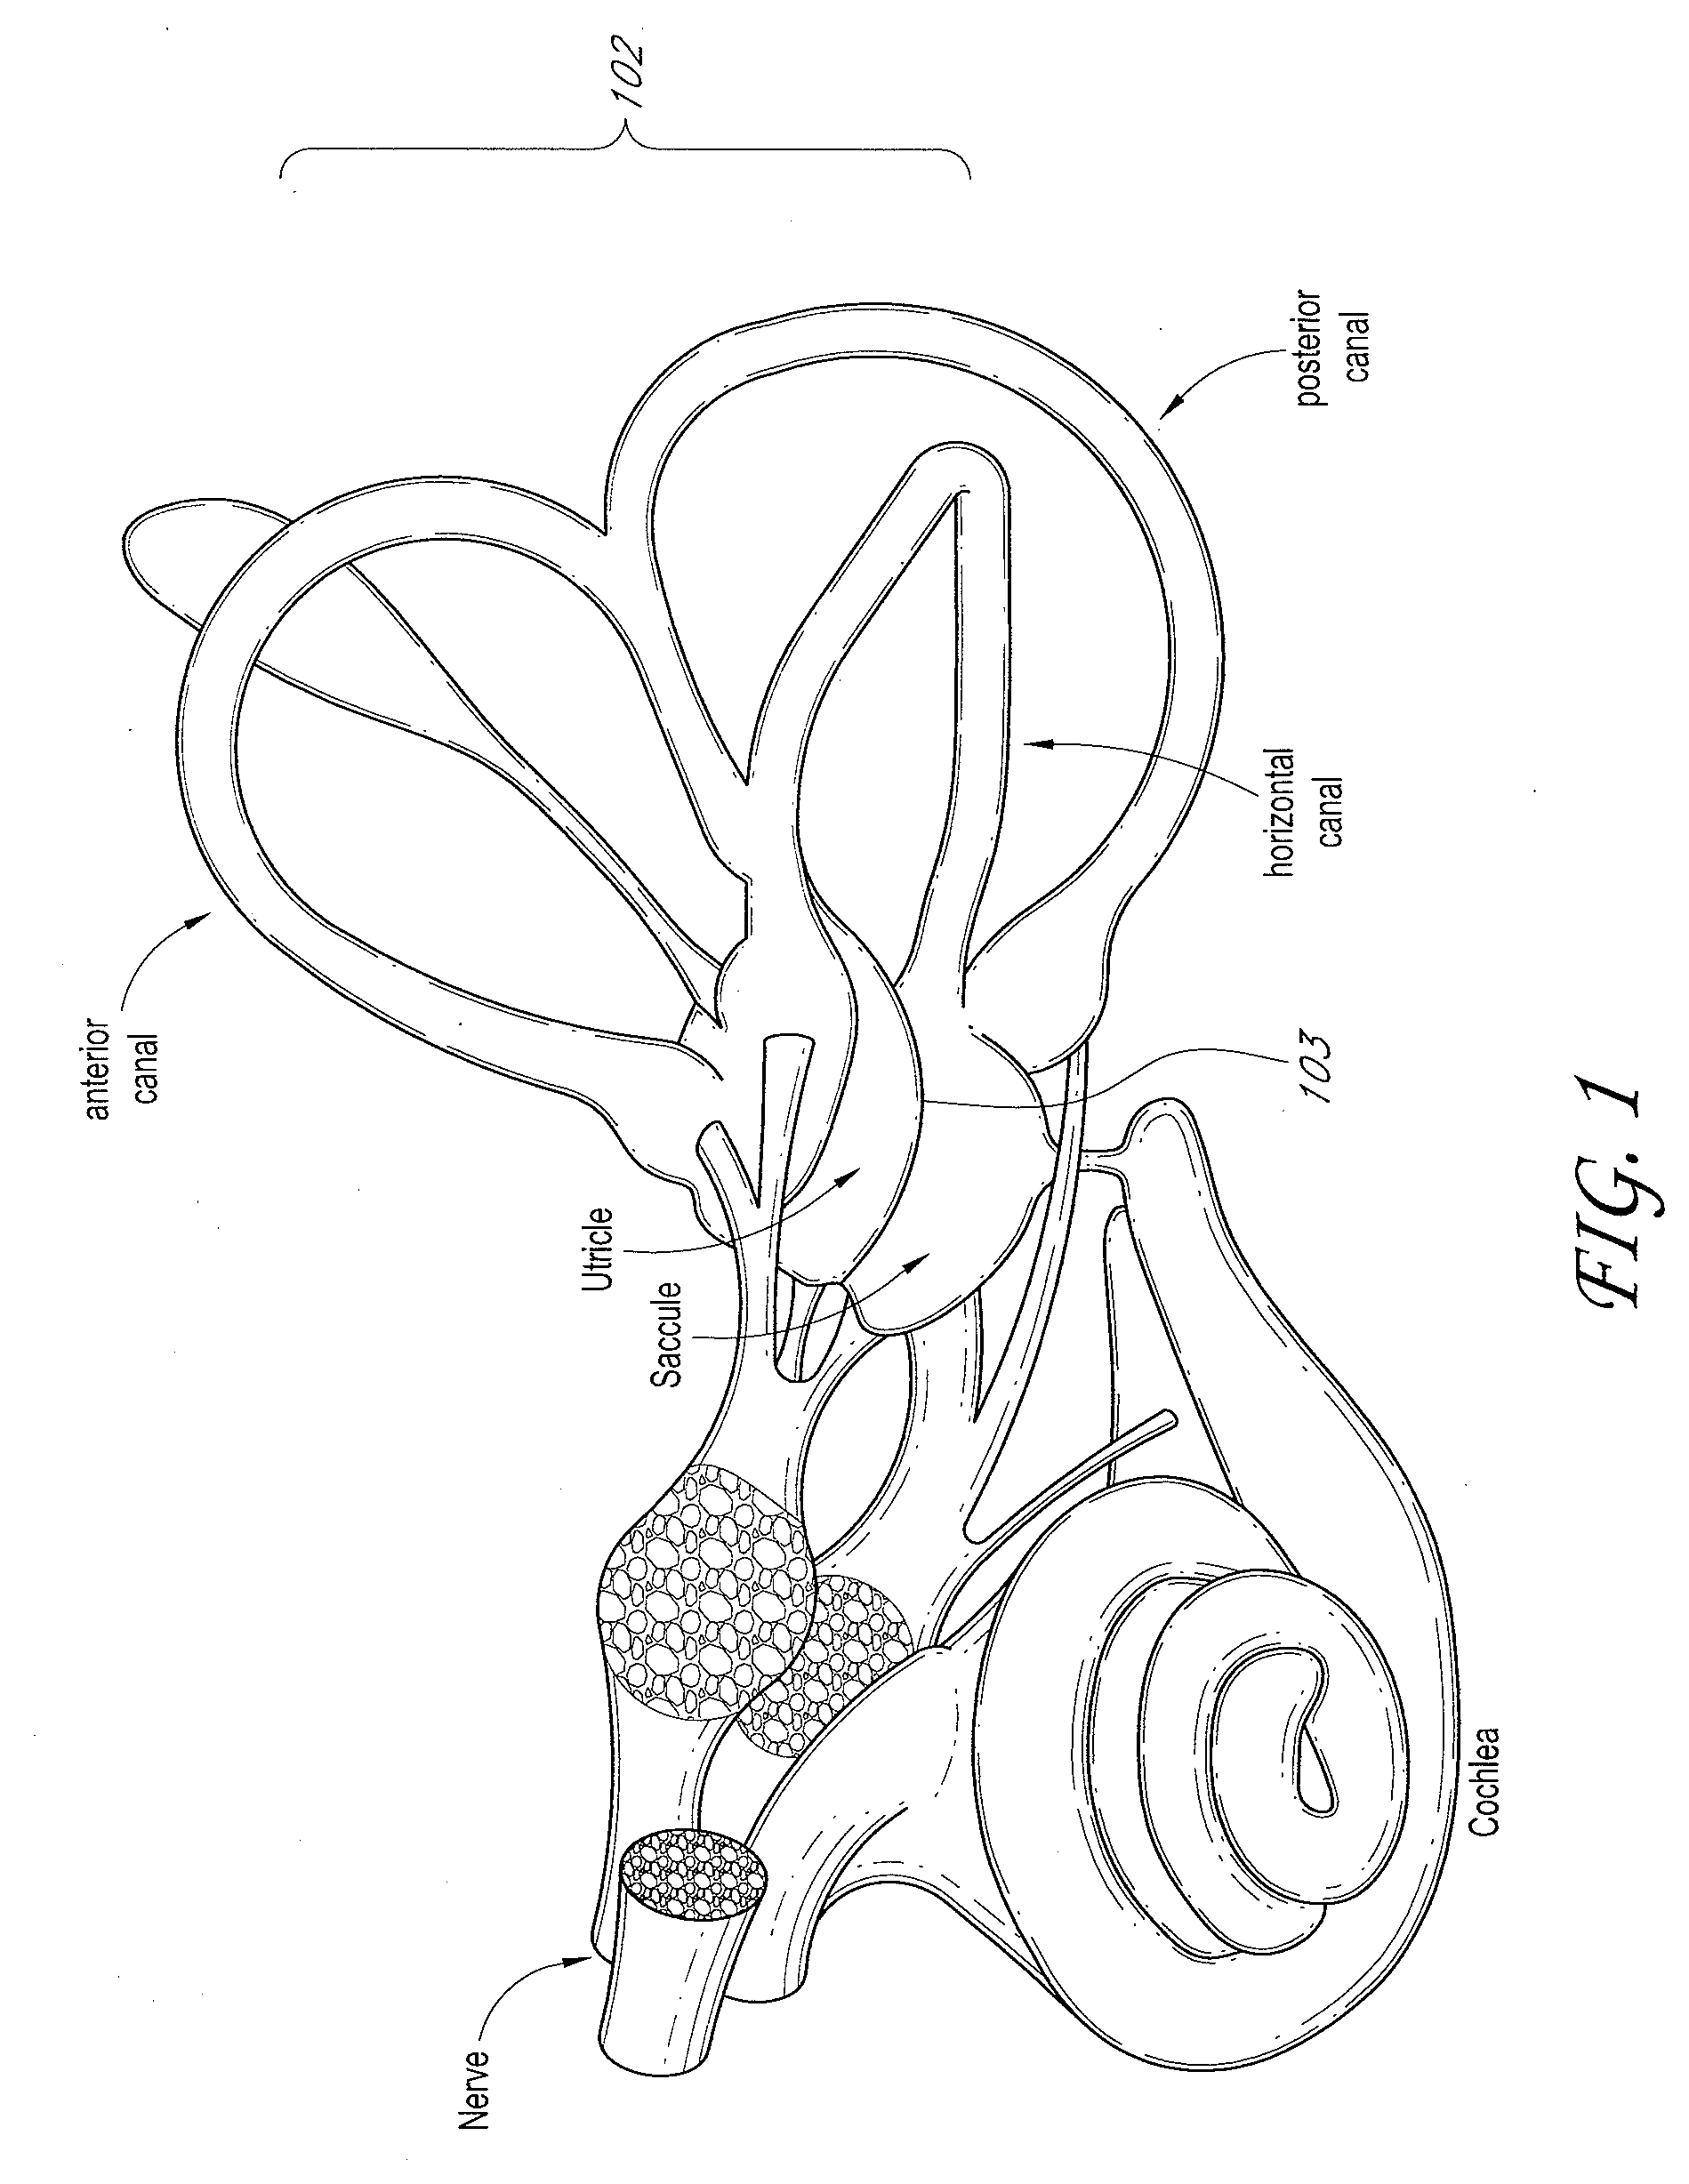 Auricular thermoregulation system for appetite suppression